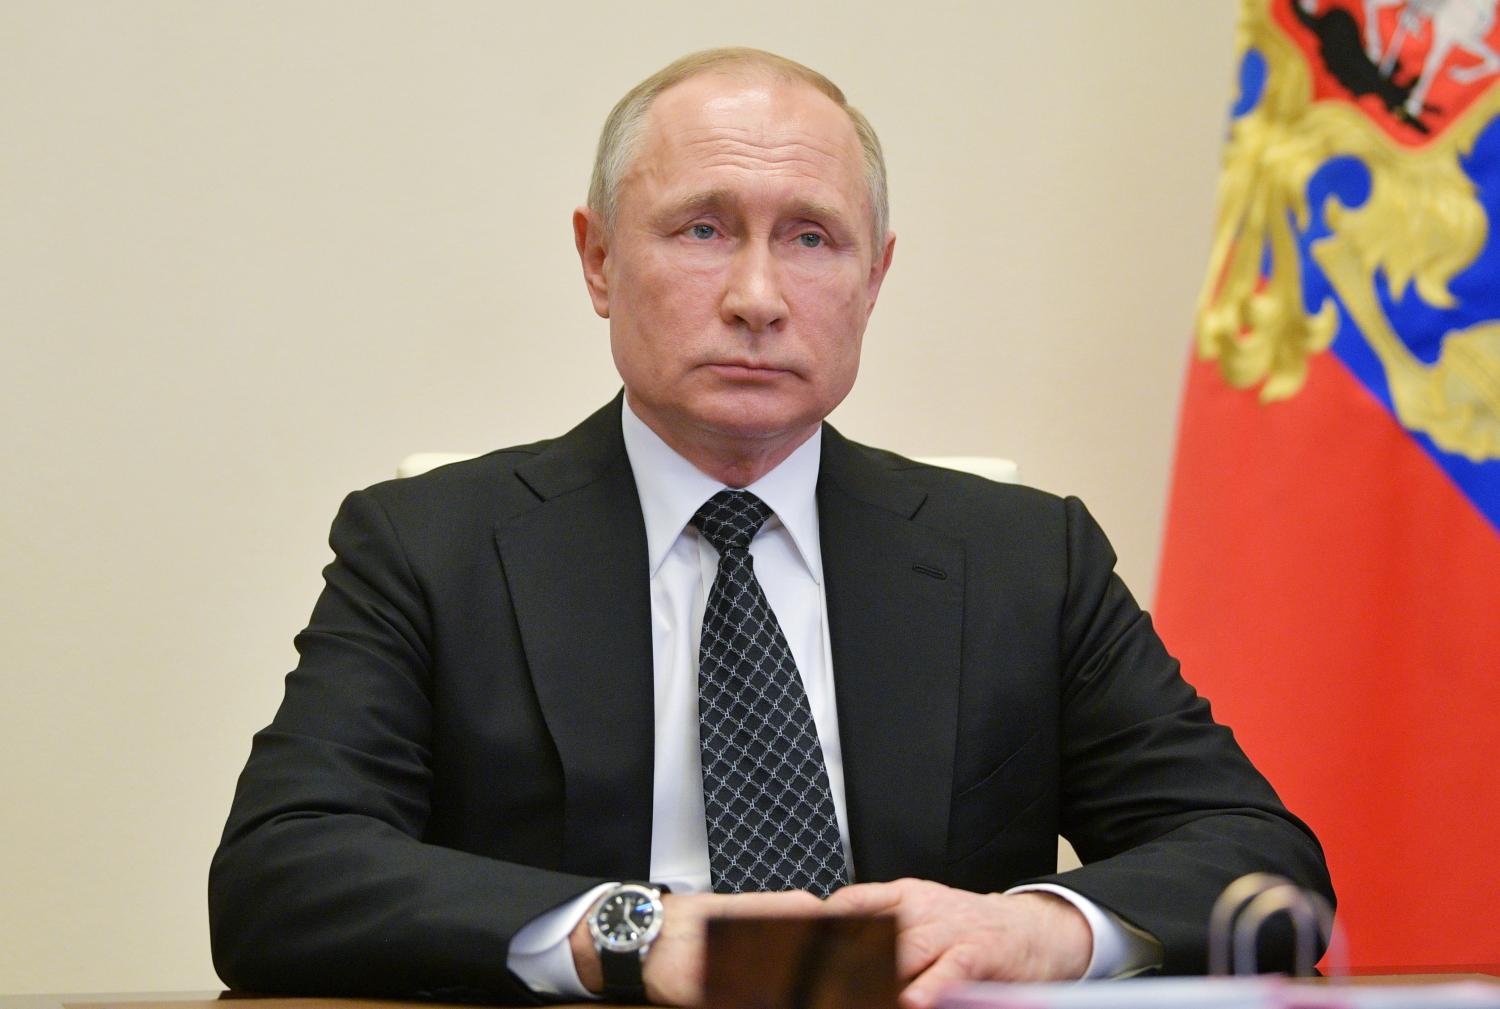 Russian President Vladimir Putin chairs a meeting with members of the Security Council via a video link at the Novo-Ogaryovo state residence outside Moscow, Russia April 16, 2020. Sputnik/Alexei Druzhinin/Kremlin via REUTERS  ATTENTION EDITORS - THIS IMAGE WAS PROVIDED BY A THIRD PARTY.